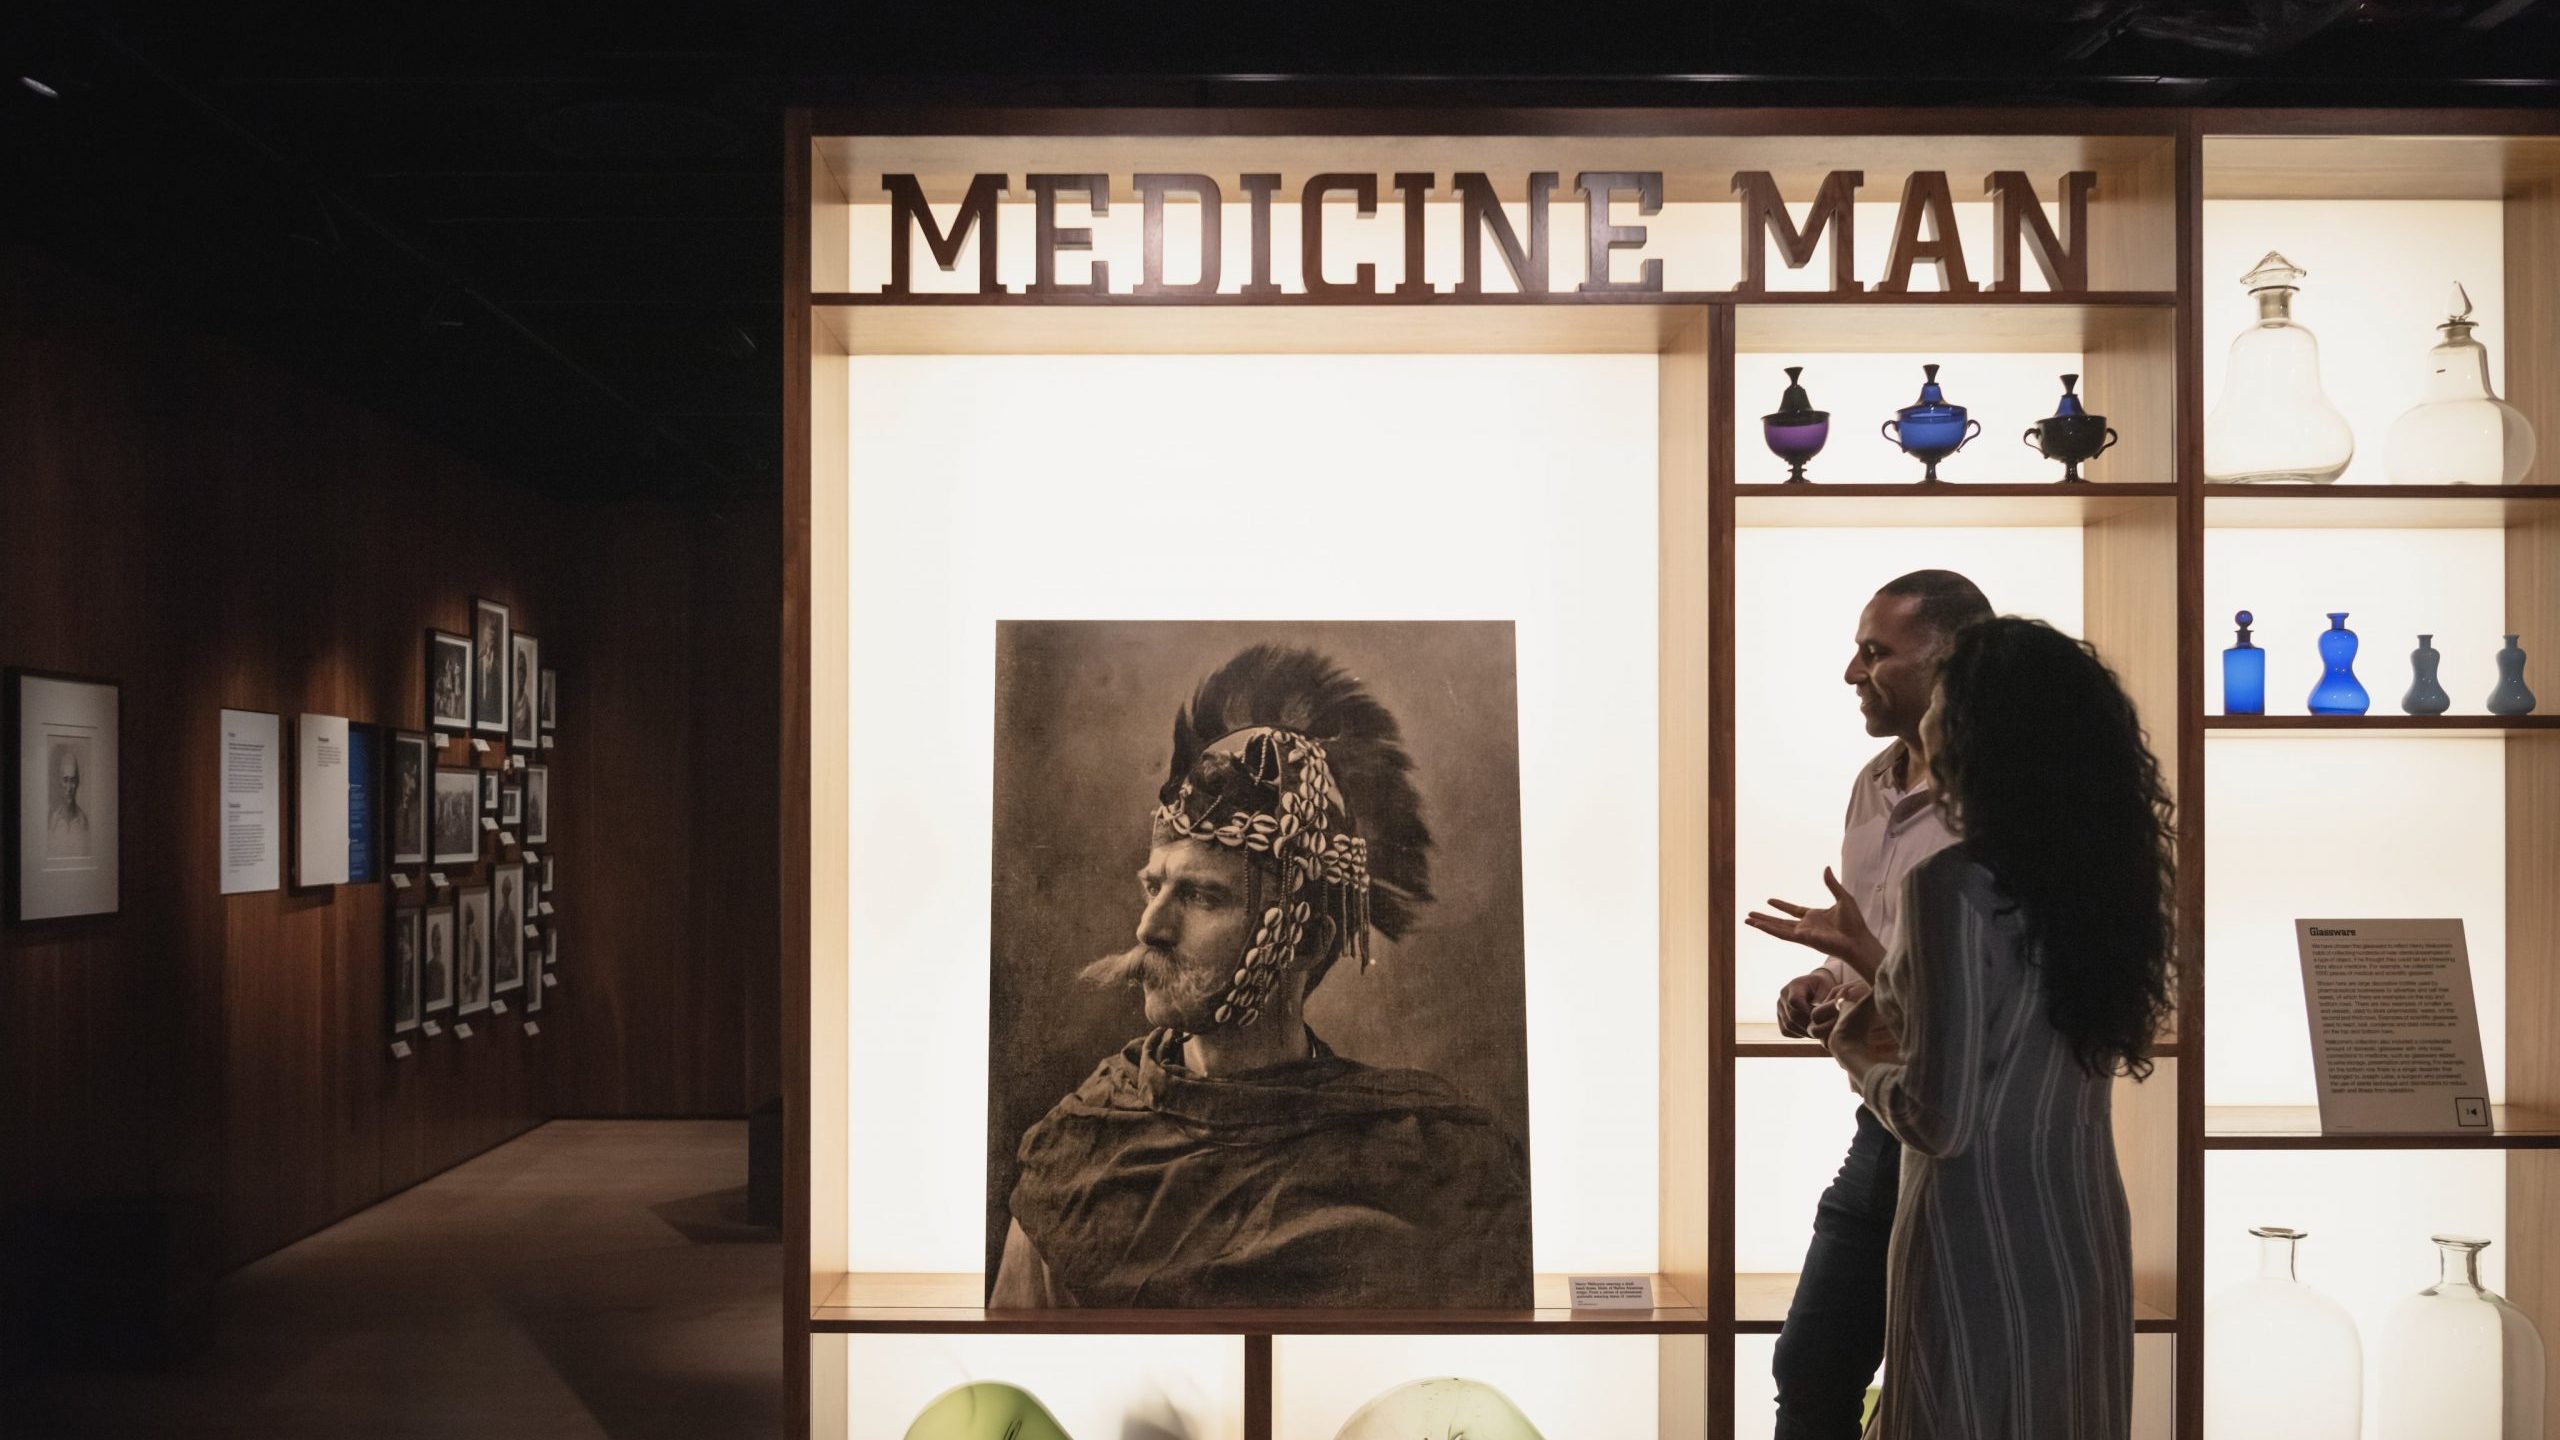 The Medicine Man gallery has been in place since the Wellcome Collection opened in 2007